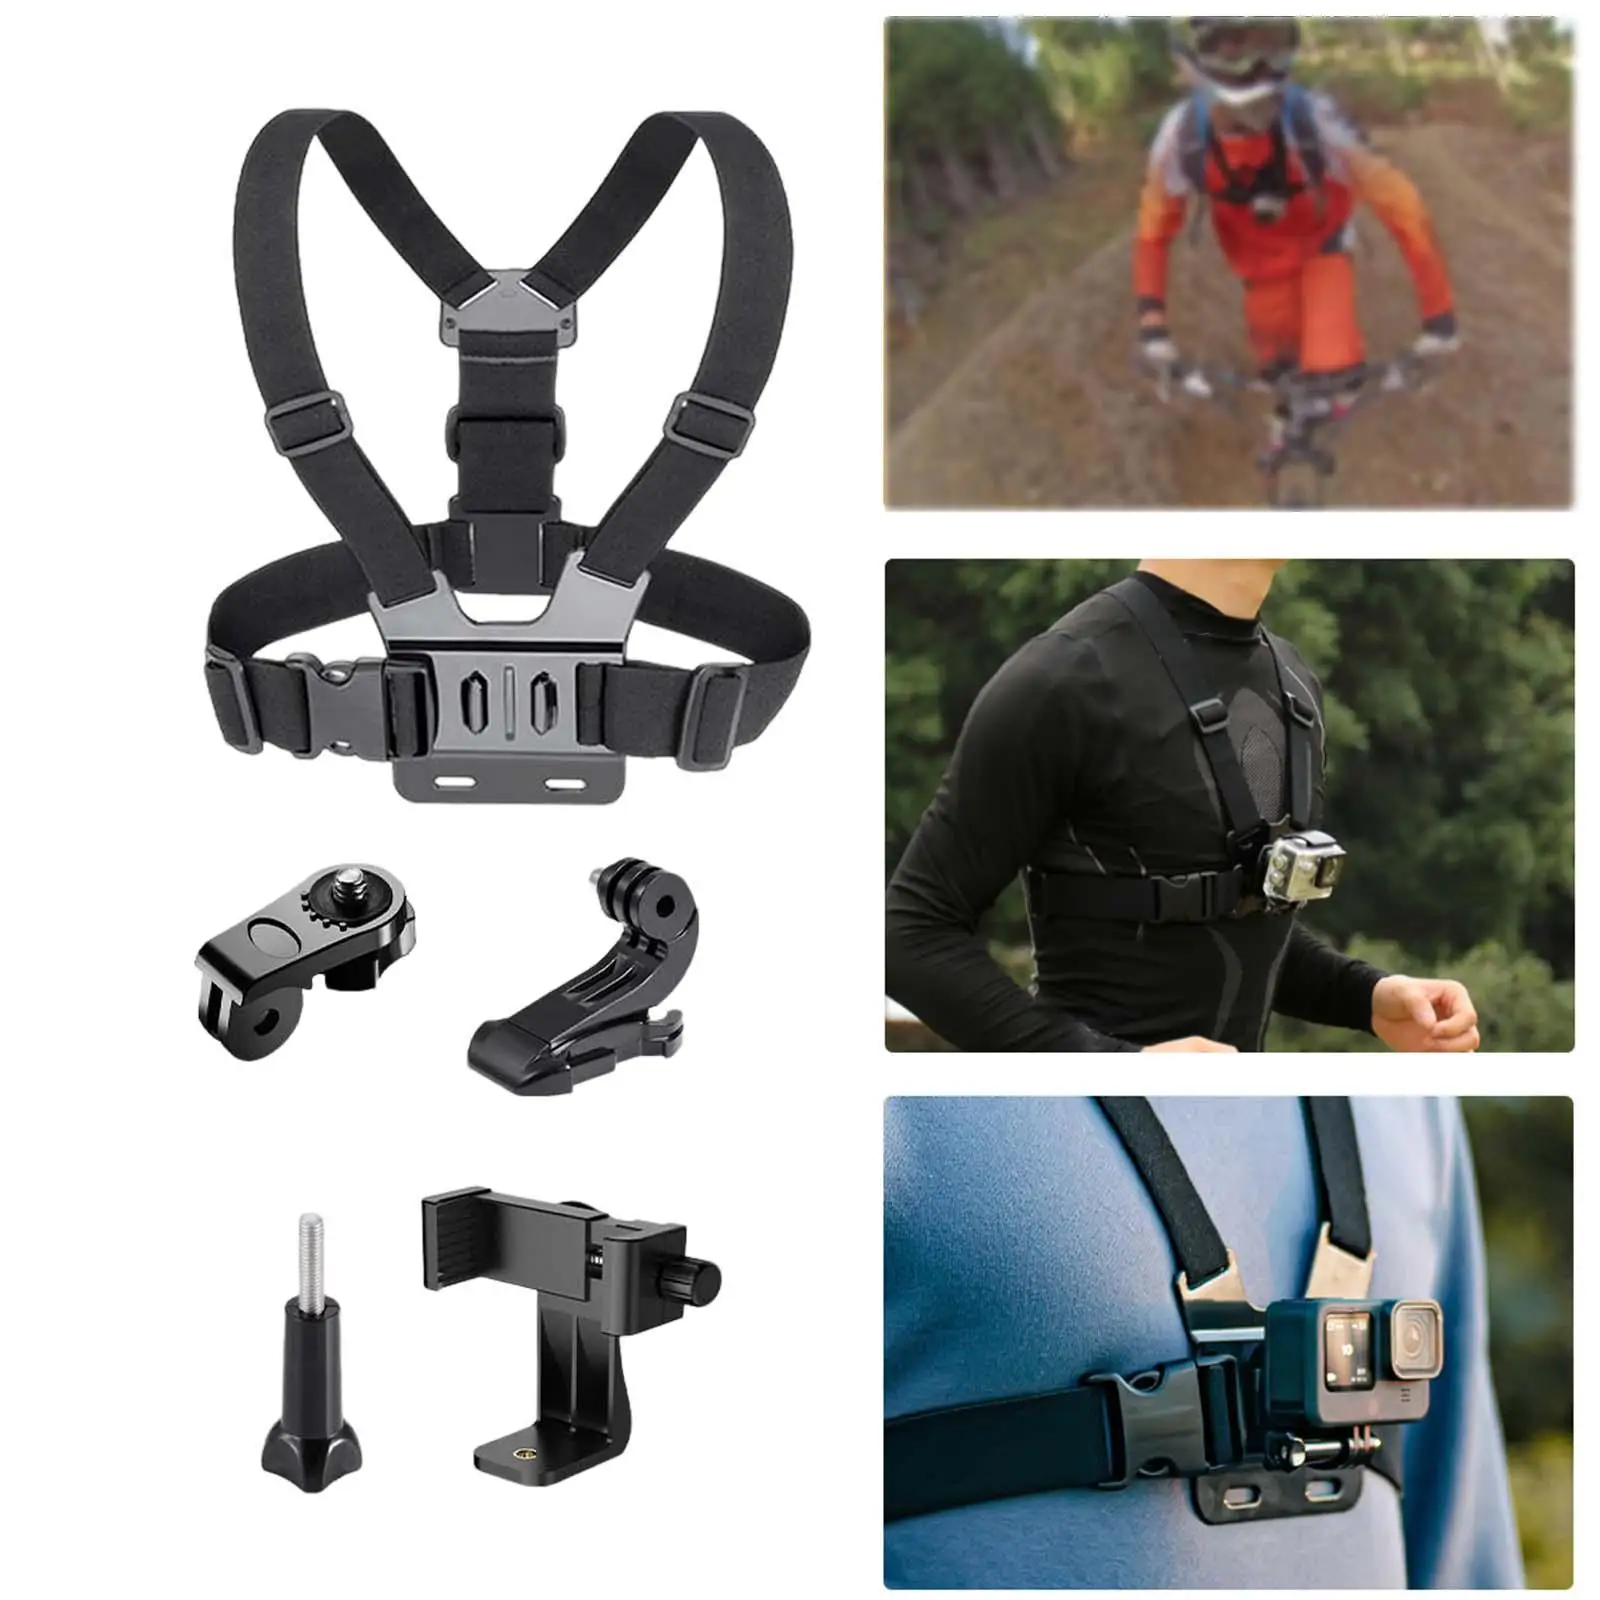 Phones Chest Strap Mount Belt Adjustable Quick Clip Mount 5 in 1 Waist Belt for Outdoor Cycling Action Cameras Smartphone Skiing